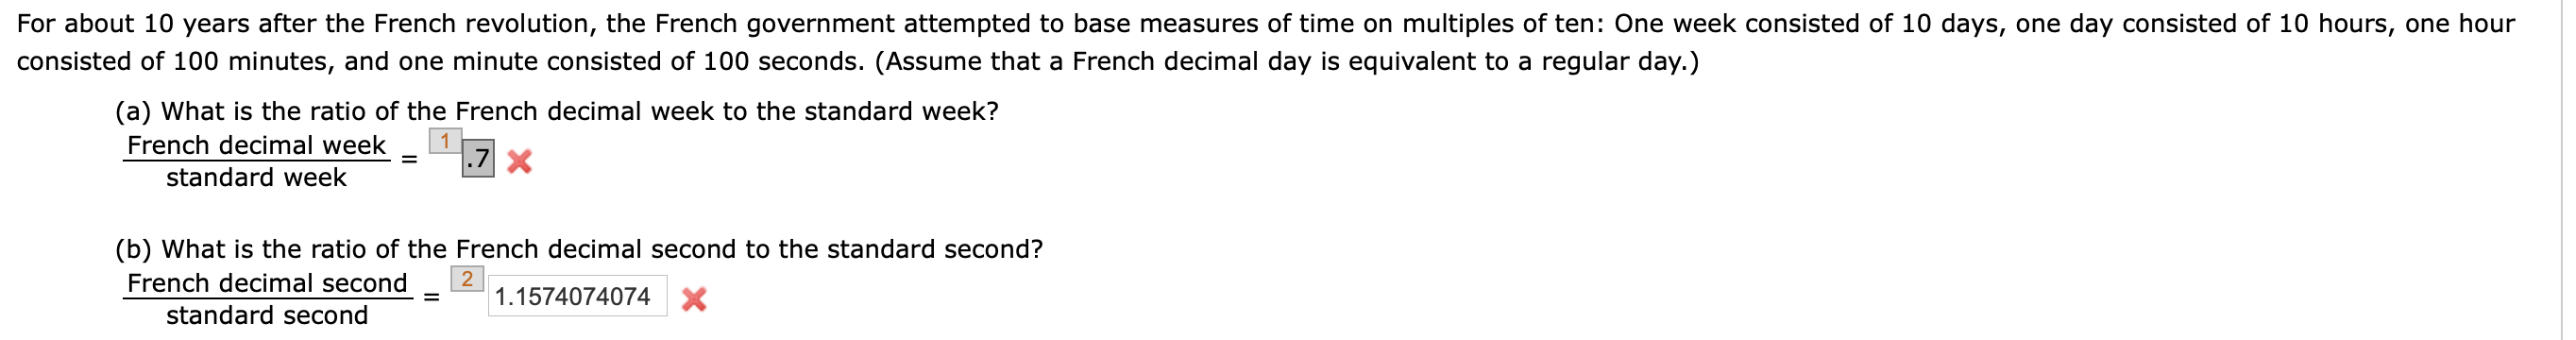 For about 10 years after the French revolution, the French government attempted to base measures of time on multiples of ten: One week consisted of 10 days, one day consisted of 10 hours, one hour
consisted of 100 minutes, and one minute consisted of 100 seconds. (Assume that a French decimal day is equivalent to a regular day.)
(a) What is the ratio of the French decimal week to the standard week?
French decimal week
.7 X
standard week
(b) What is the ratio of the French decimal second to the standard second?
2
1.1574074074 X
French decimal second
%D
standard second
